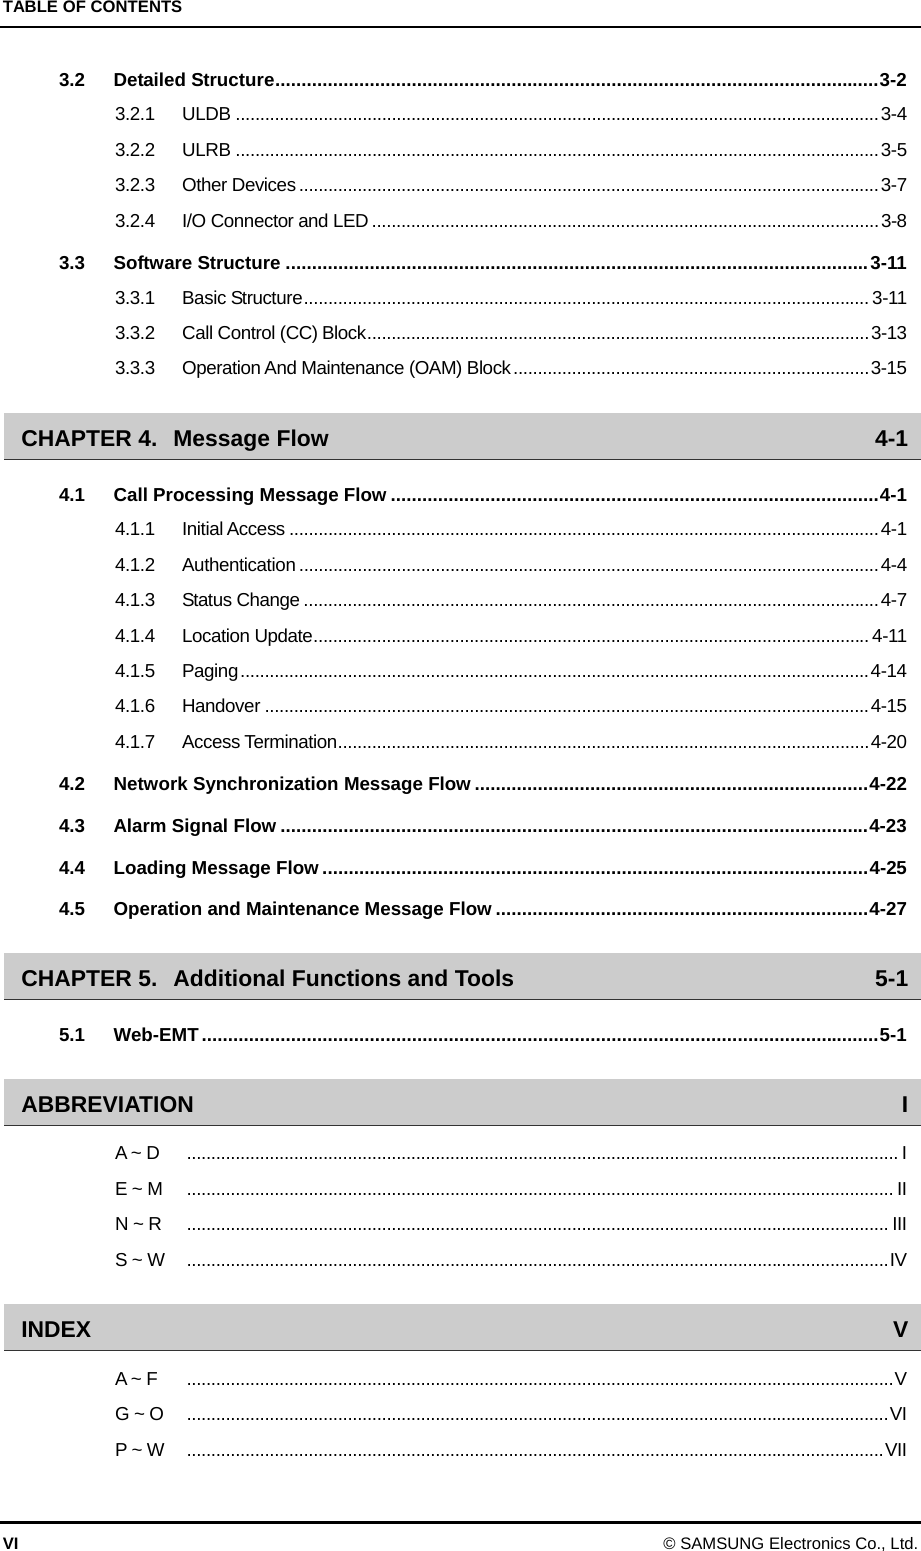 TABLE OF CONTENTS VI © SAMSUNG Electronics Co., Ltd. 3.2Detailed Structure...................................................................................................................3-23.2.1ULDB ....................................................................................................................................3-43.2.2ULRB ....................................................................................................................................3-53.2.3Other Devices .......................................................................................................................3-73.2.4I/O Connector and LED ........................................................................................................3-83.3Software Structure ...............................................................................................................3-113.3.1Basic Structure.................................................................................................................... 3-113.3.2Call Control (CC) Block.......................................................................................................3-133.3.3Operation And Maintenance (OAM) Block.........................................................................3-15CHAPTER 4.Message Flow  4-14.1Call Processing Message Flow .............................................................................................4-14.1.1Initial Access .........................................................................................................................4-14.1.2Authentication .......................................................................................................................4-44.1.3Status Change ......................................................................................................................4-74.1.4Location Update.................................................................................................................. 4-114.1.5Paging.................................................................................................................................4-144.1.6Handover ............................................................................................................................4-154.1.7Access Termination.............................................................................................................4-204.2Network Synchronization Message Flow ...........................................................................4-224.3Alarm Signal Flow ................................................................................................................4-234.4Loading Message Flow ........................................................................................................4-254.5Operation and Maintenance Message Flow .......................................................................4-27CHAPTER 5.Additional Functions and Tools  5-15.1Web-EMT.................................................................................................................................5-1ABBREVIATION IA ~ D  .................................................................................................................................................. IE ~ M  ................................................................................................................................................. IIN ~ R  ................................................................................................................................................ IIIS ~ W  ................................................................................................................................................IVINDEX  VA ~ F  .................................................................................................................................................VG ~ O  ................................................................................................................................................VIP ~ W  ...............................................................................................................................................VII 